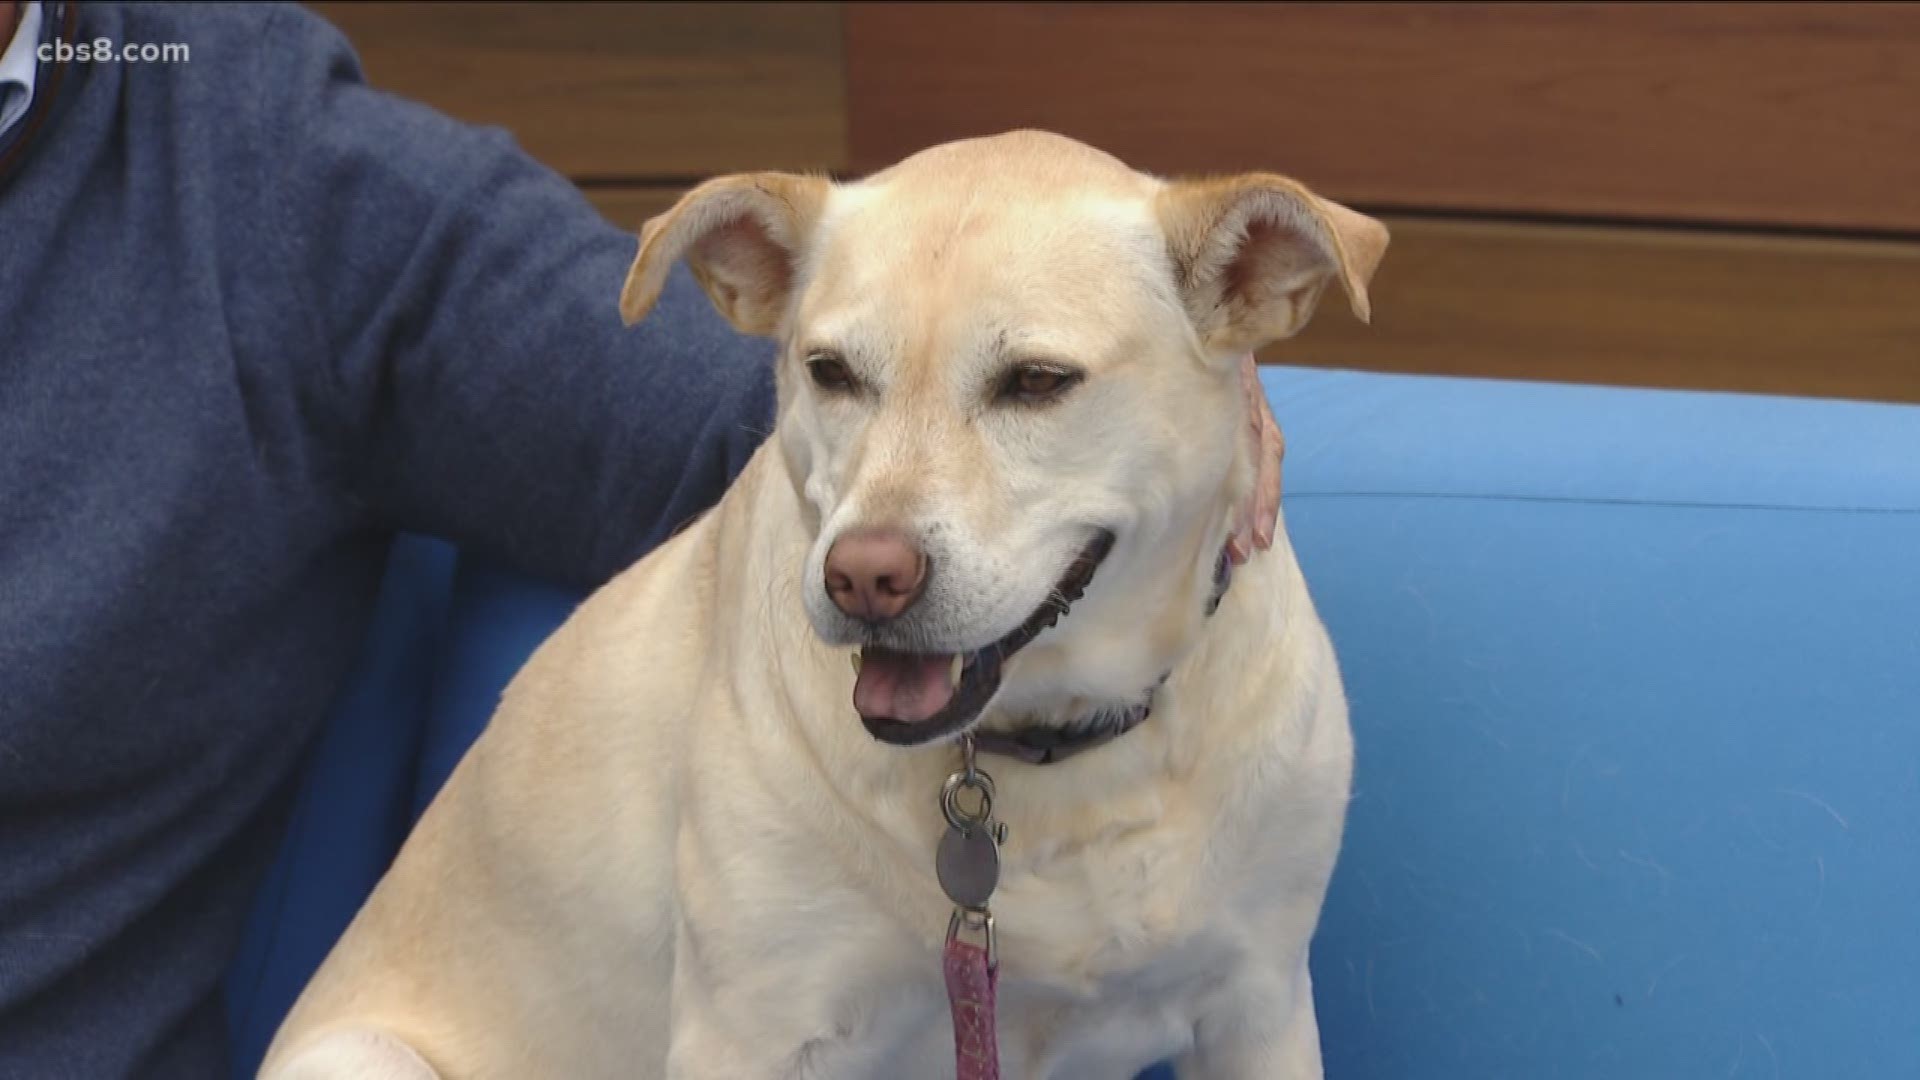 Scott MacDonald, co-author of Think Like a Dog and his dog Sadie, a mixed breed Labrador Retriever that Scott and his son rescued from the streets, visited Morning Extra to talk about how dogs can teach us how to be happy in life and successful at work.